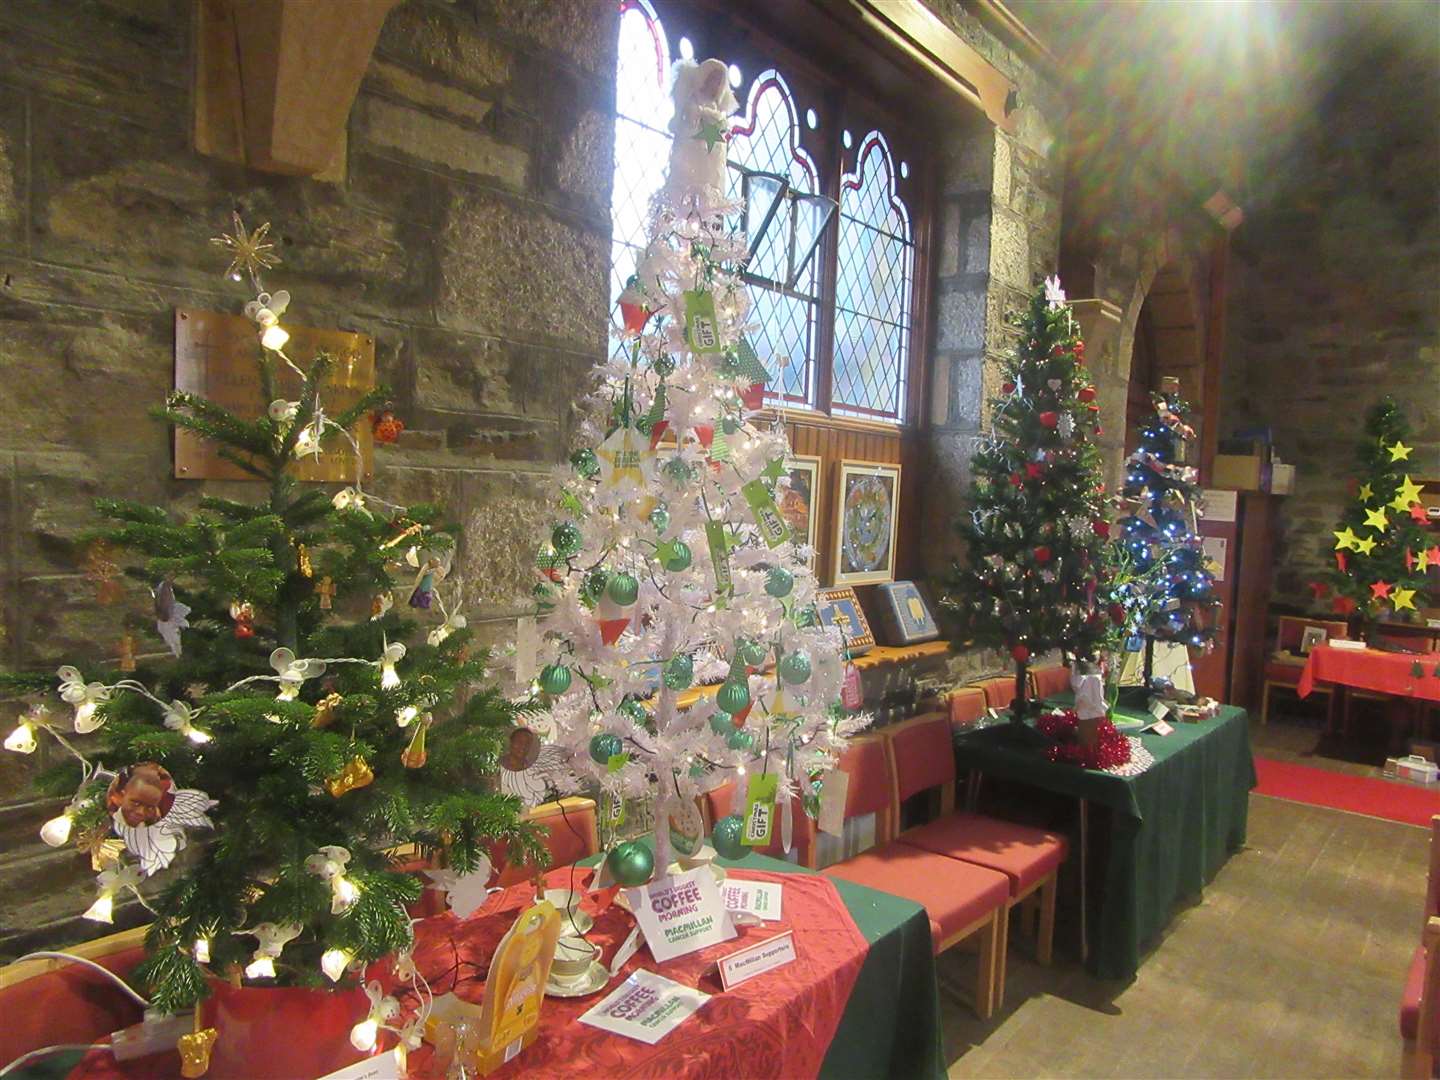 The Christmas tree festival at St Columba's in Grantown-on-Spey.